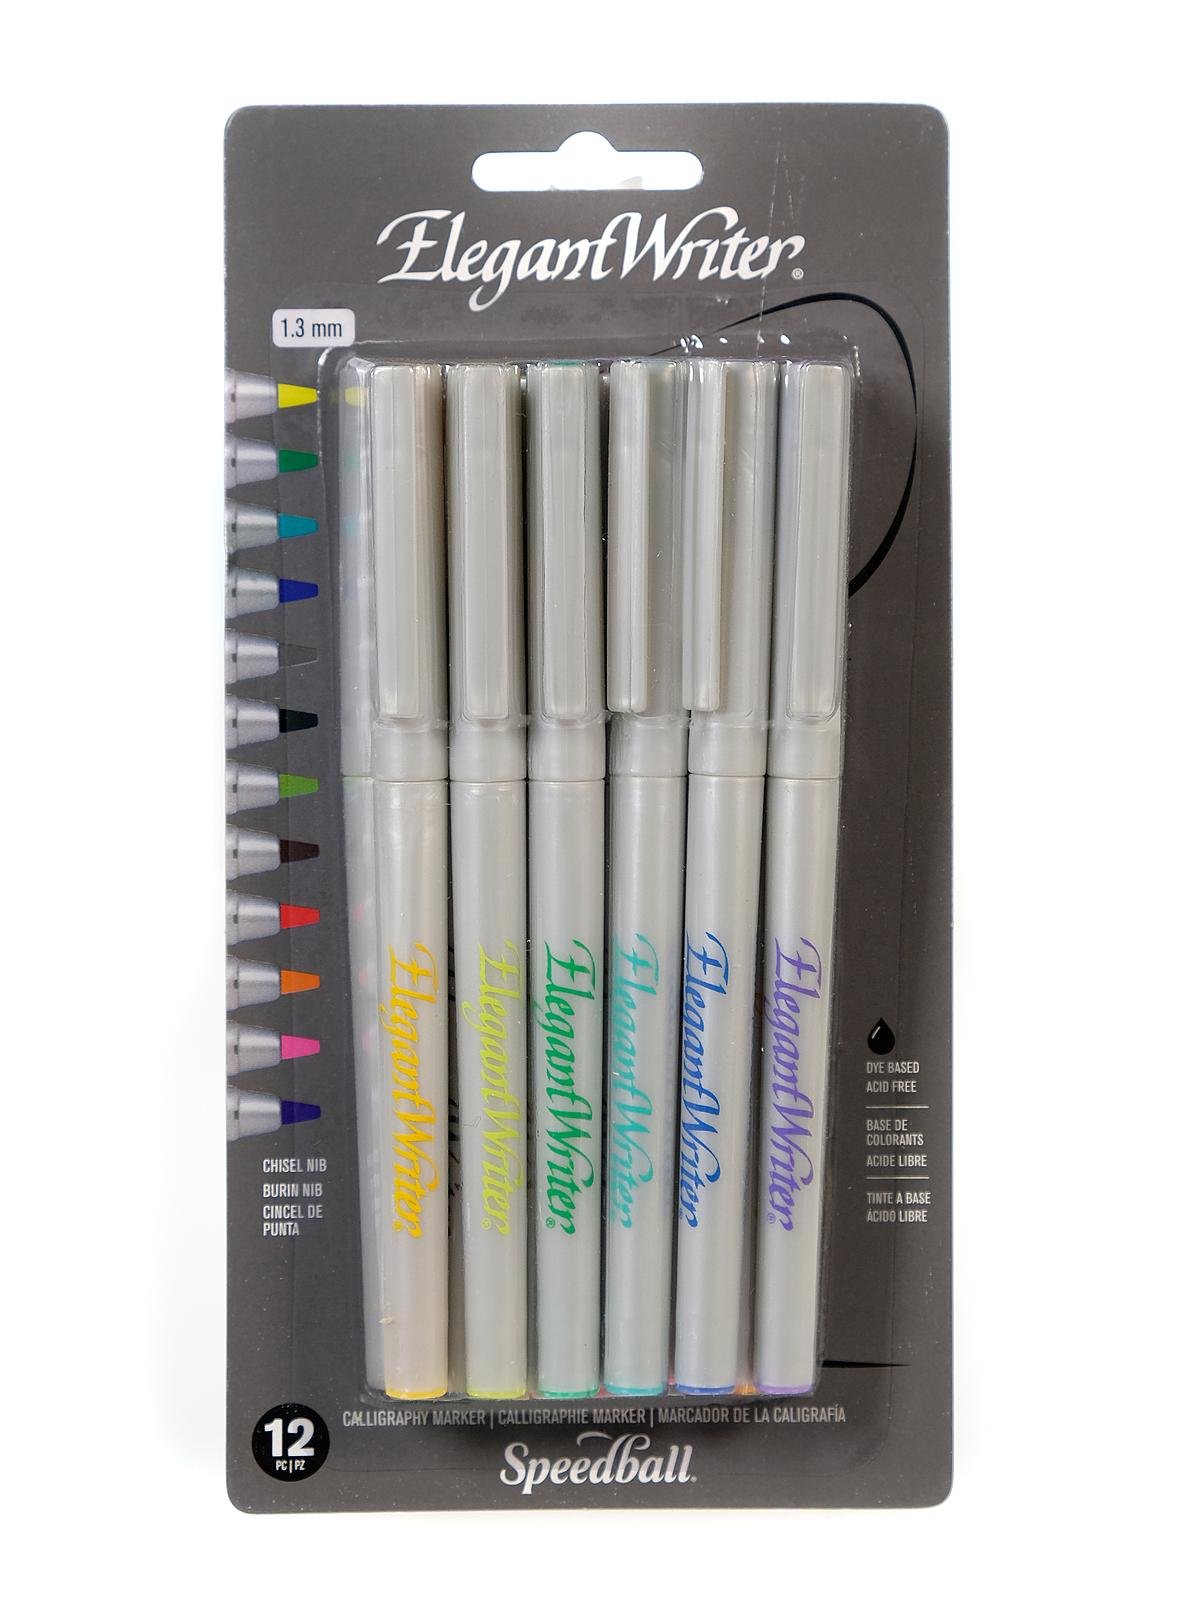  Speedball Elegant Writer Calligraphy 6 Marker Set, Assorted  Colors, 3.0 mm Chisel Nib Tip Pens for Drawing, Journaling, and Scrapbooking